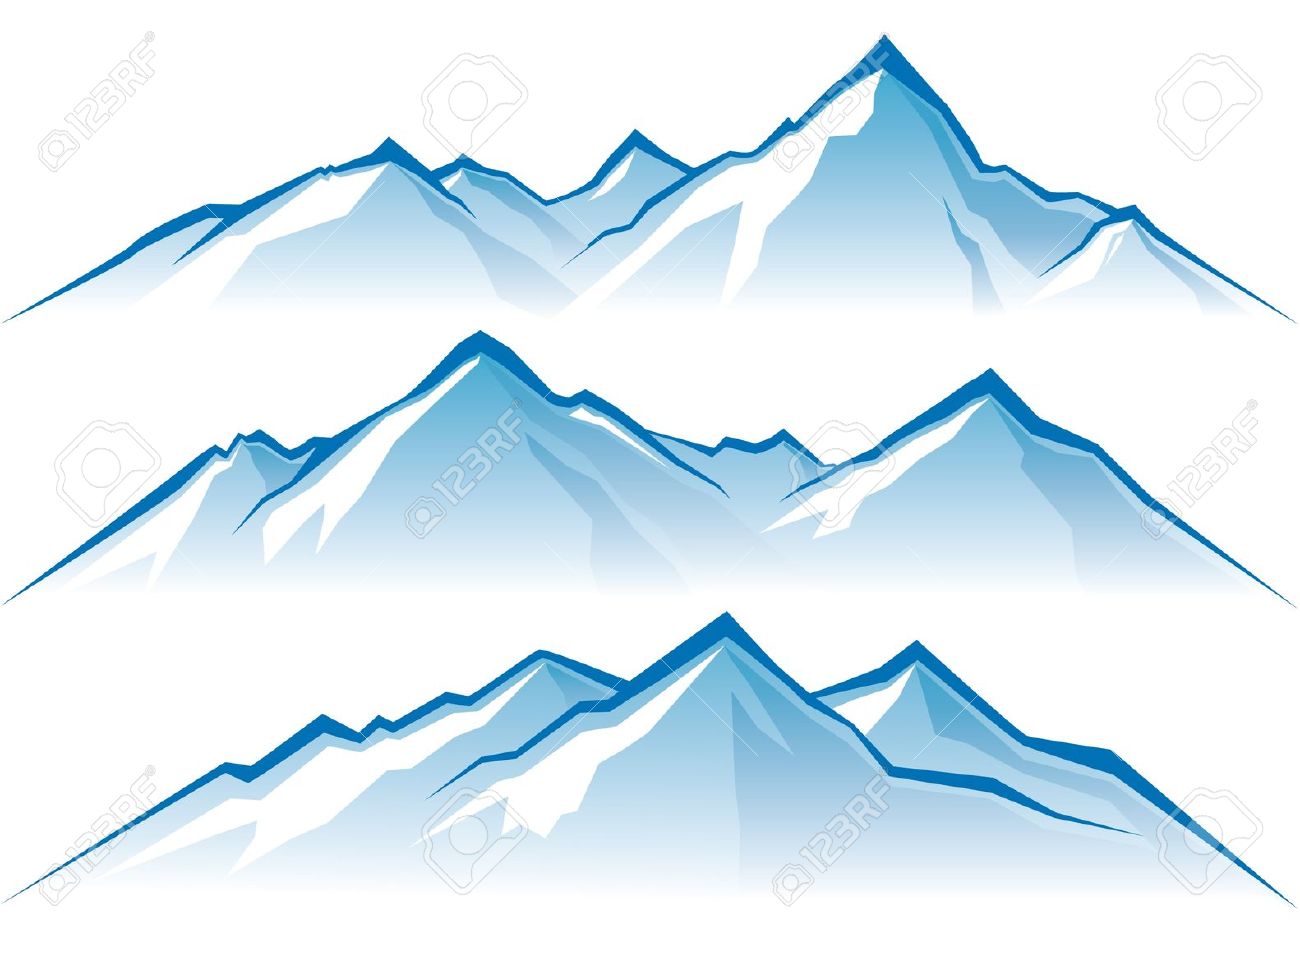 snow capped mountains clipart - photo #17